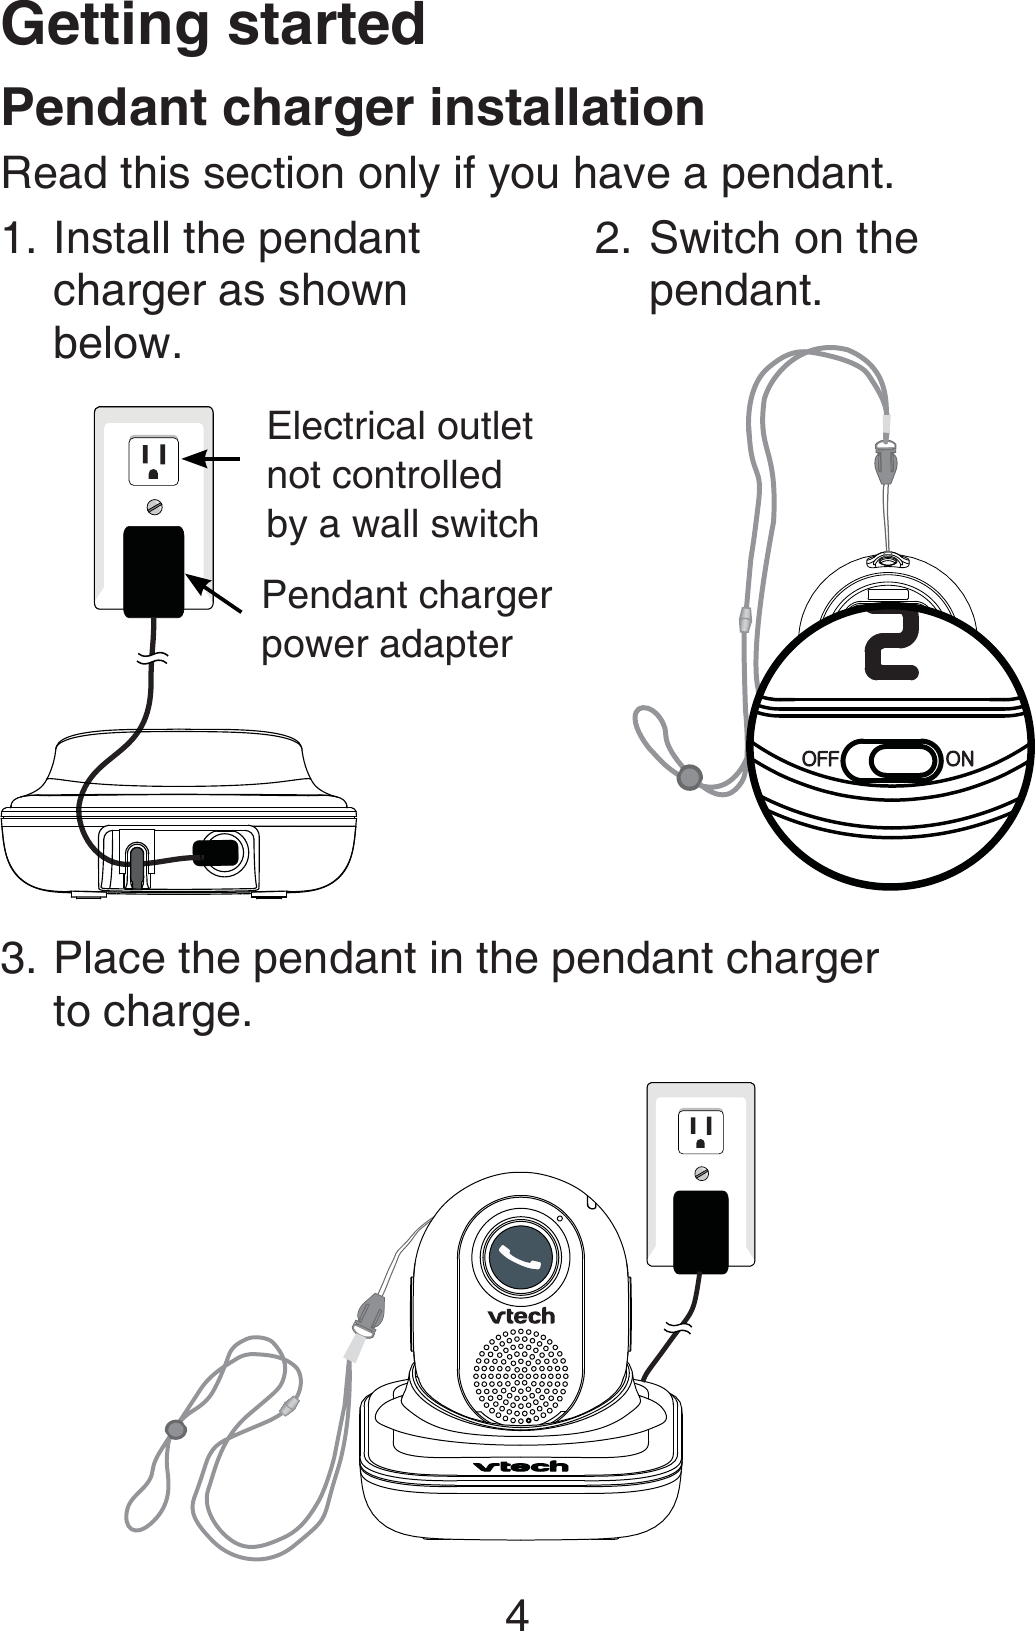 Getting started4Pendant charger power adapterElectrical outlet not controlled by a wall switchInstall the pendant charger as shown below.1.Pendant charger installationRead this section only if you have a pendant.Switch on the pendant.2.Place the pendant in the pendant charger  to charge. 3.